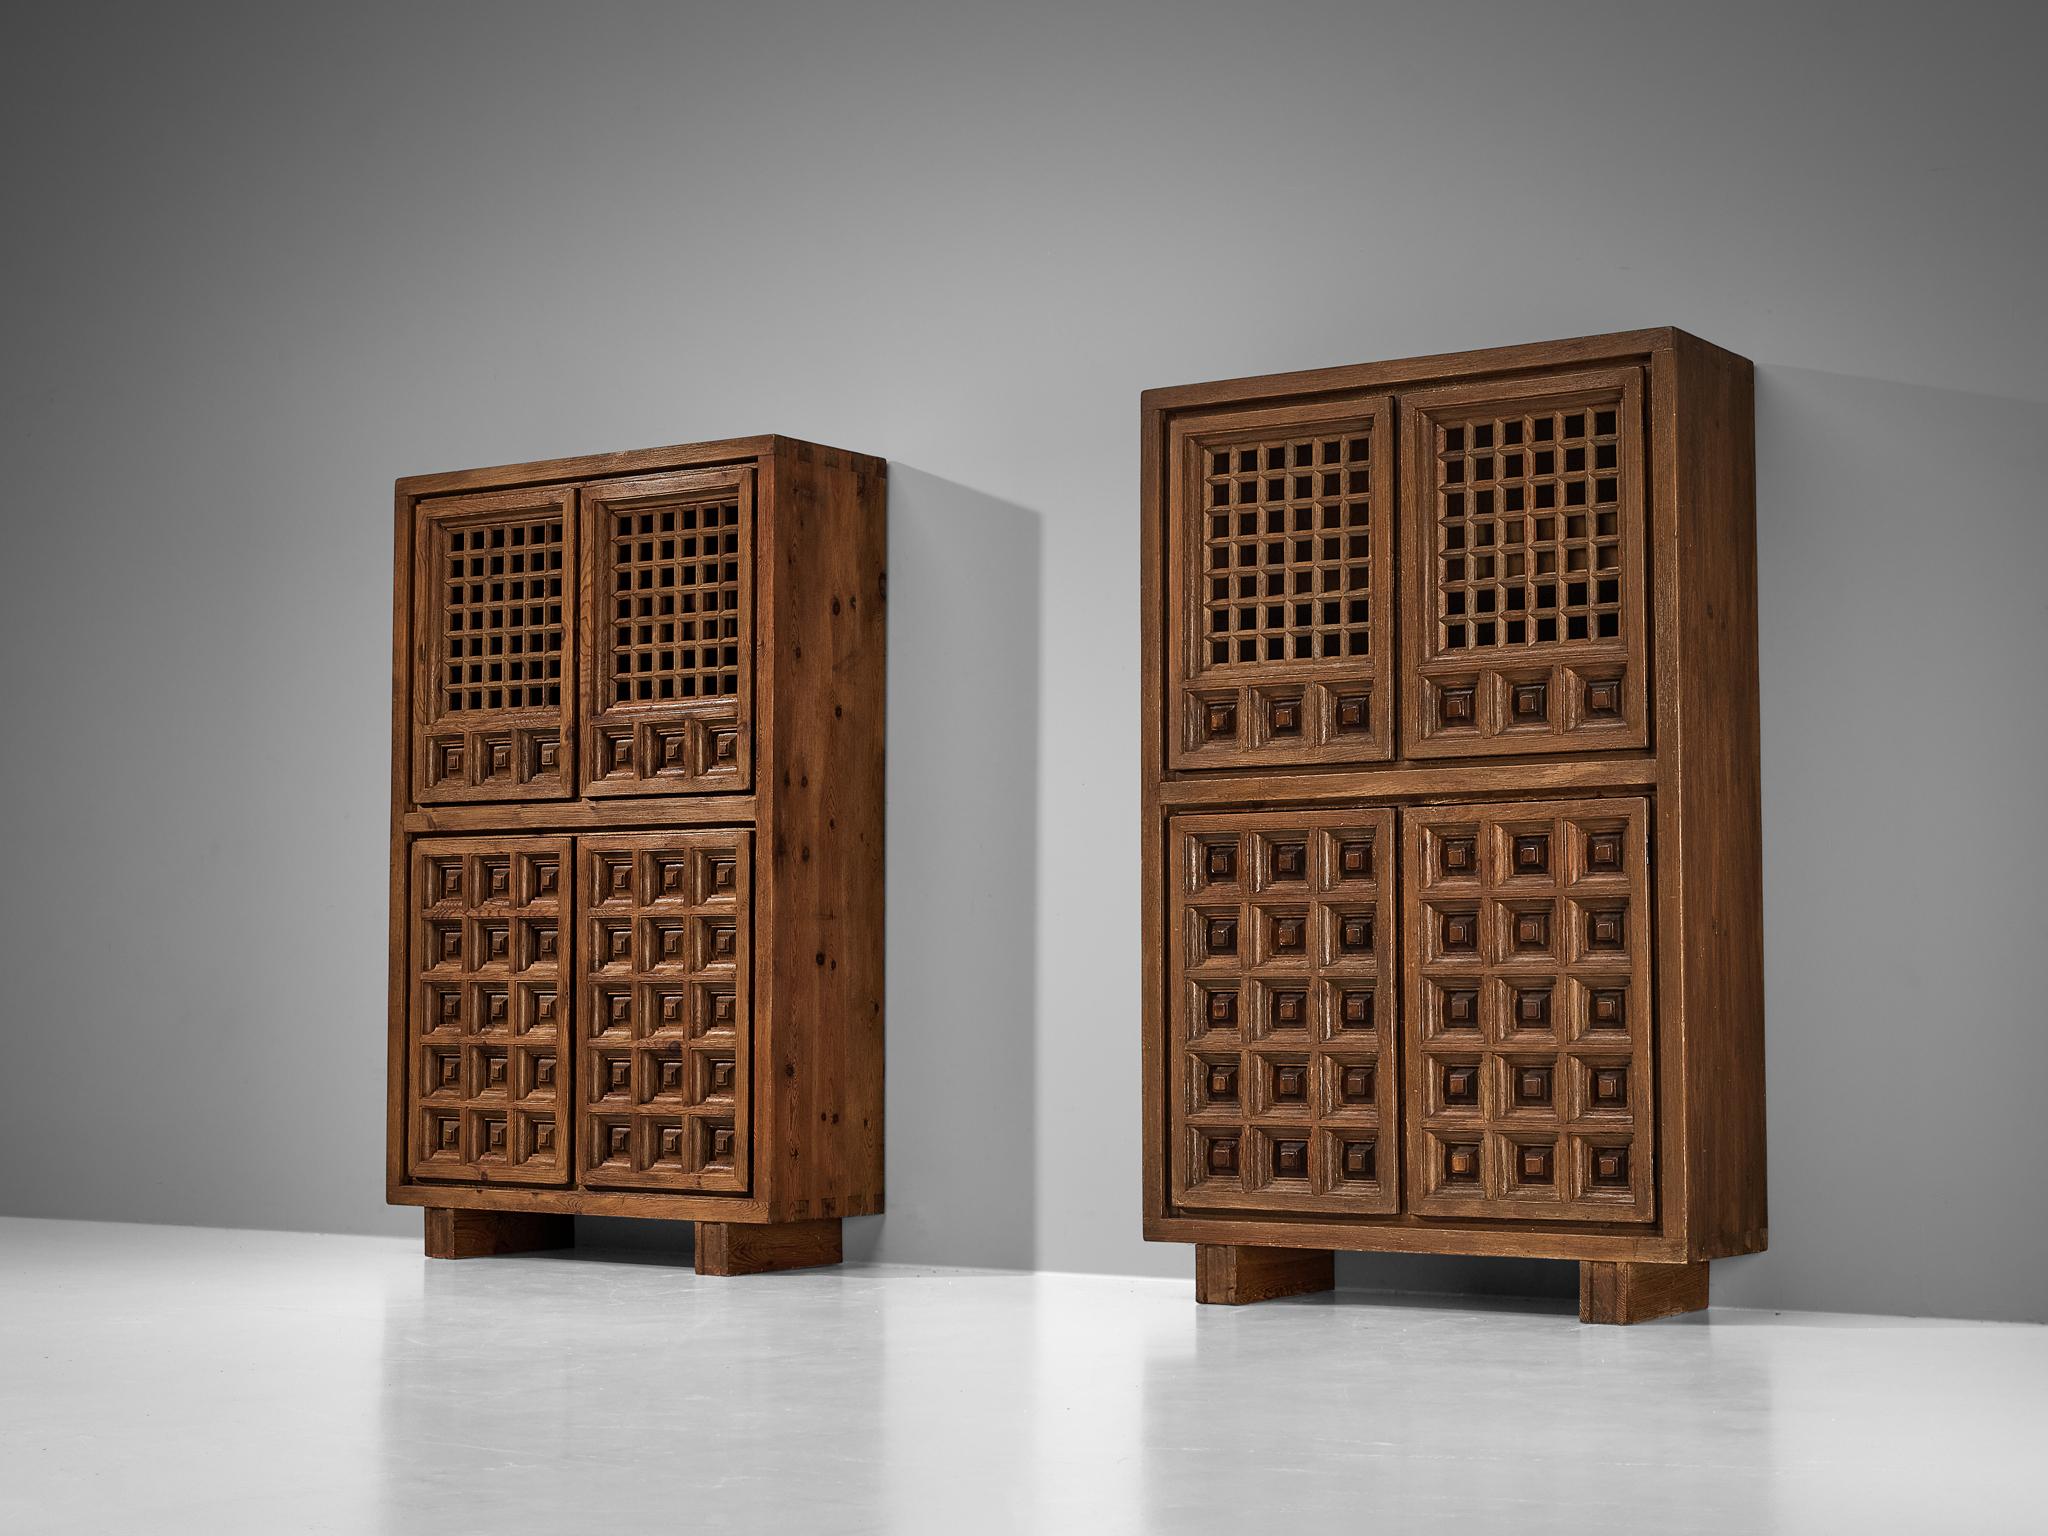 Biosca, highboards, stained pine, Spain, 1960s 

Outstanding Spanish cabinet that is executed by Biosca in an architectural way. The door panels feature a relief surface of graphic carved squares. This is very typical for Brutalist style, while the